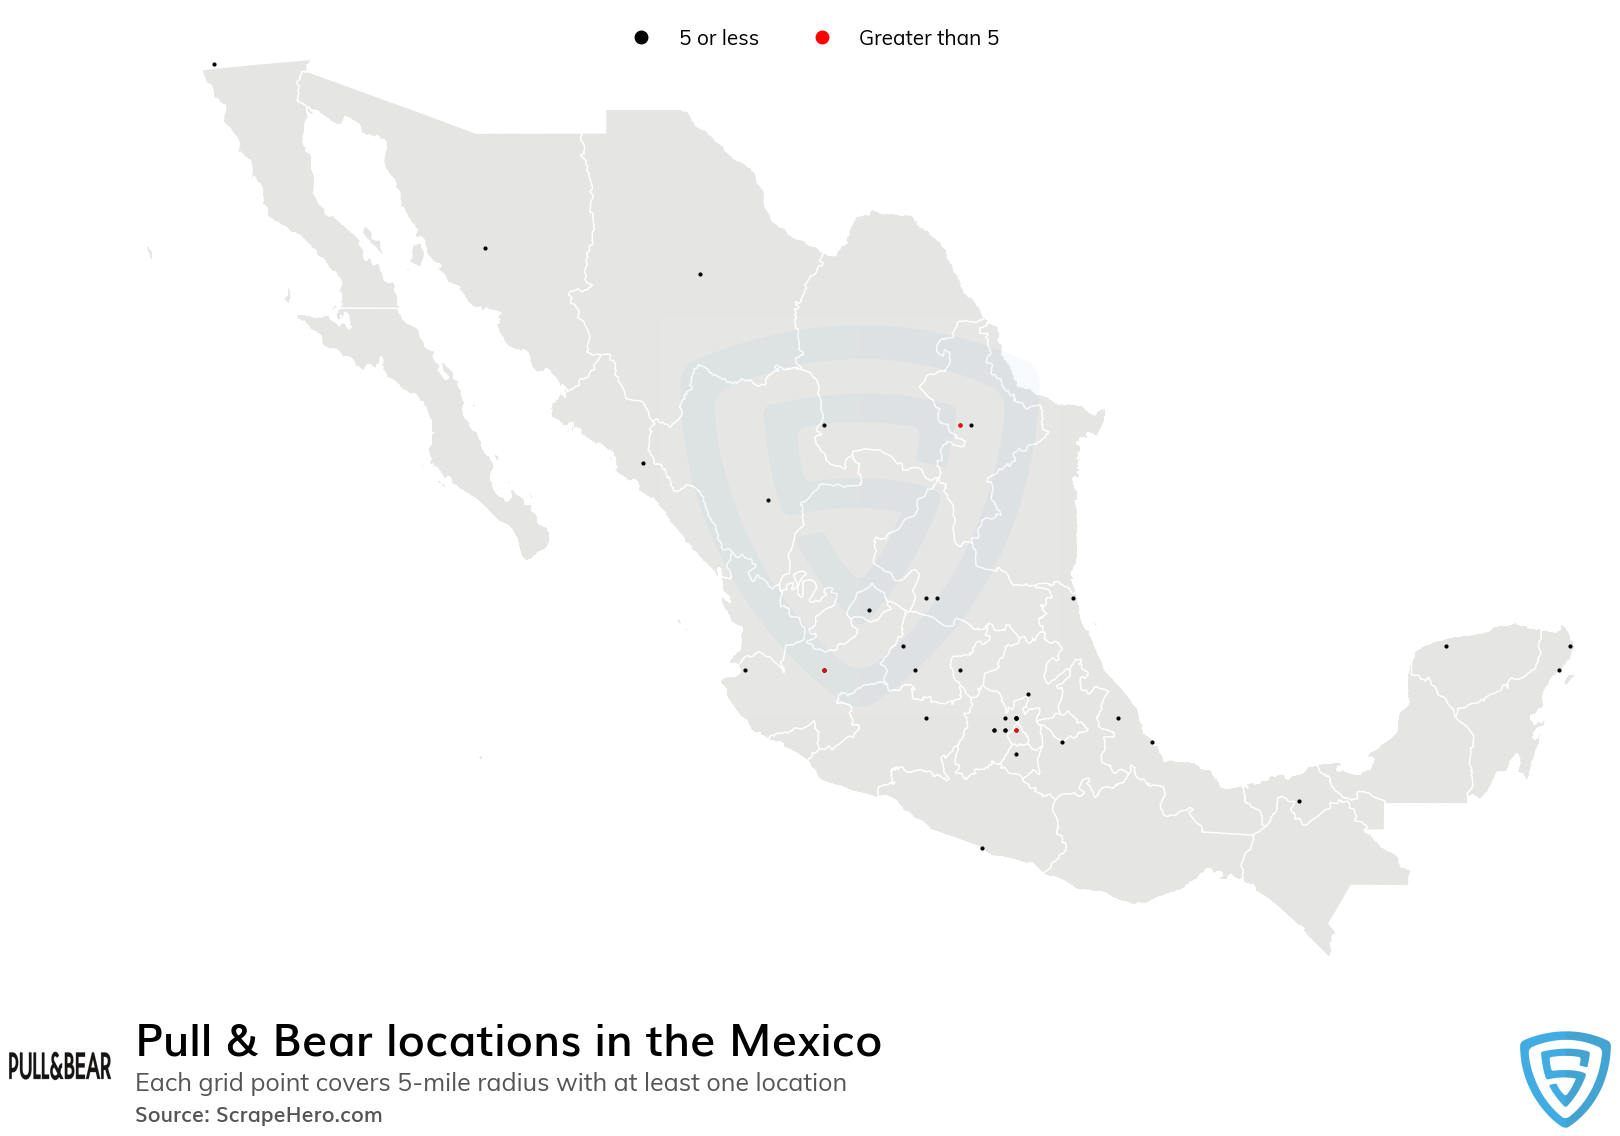 Pull & Bear store locations